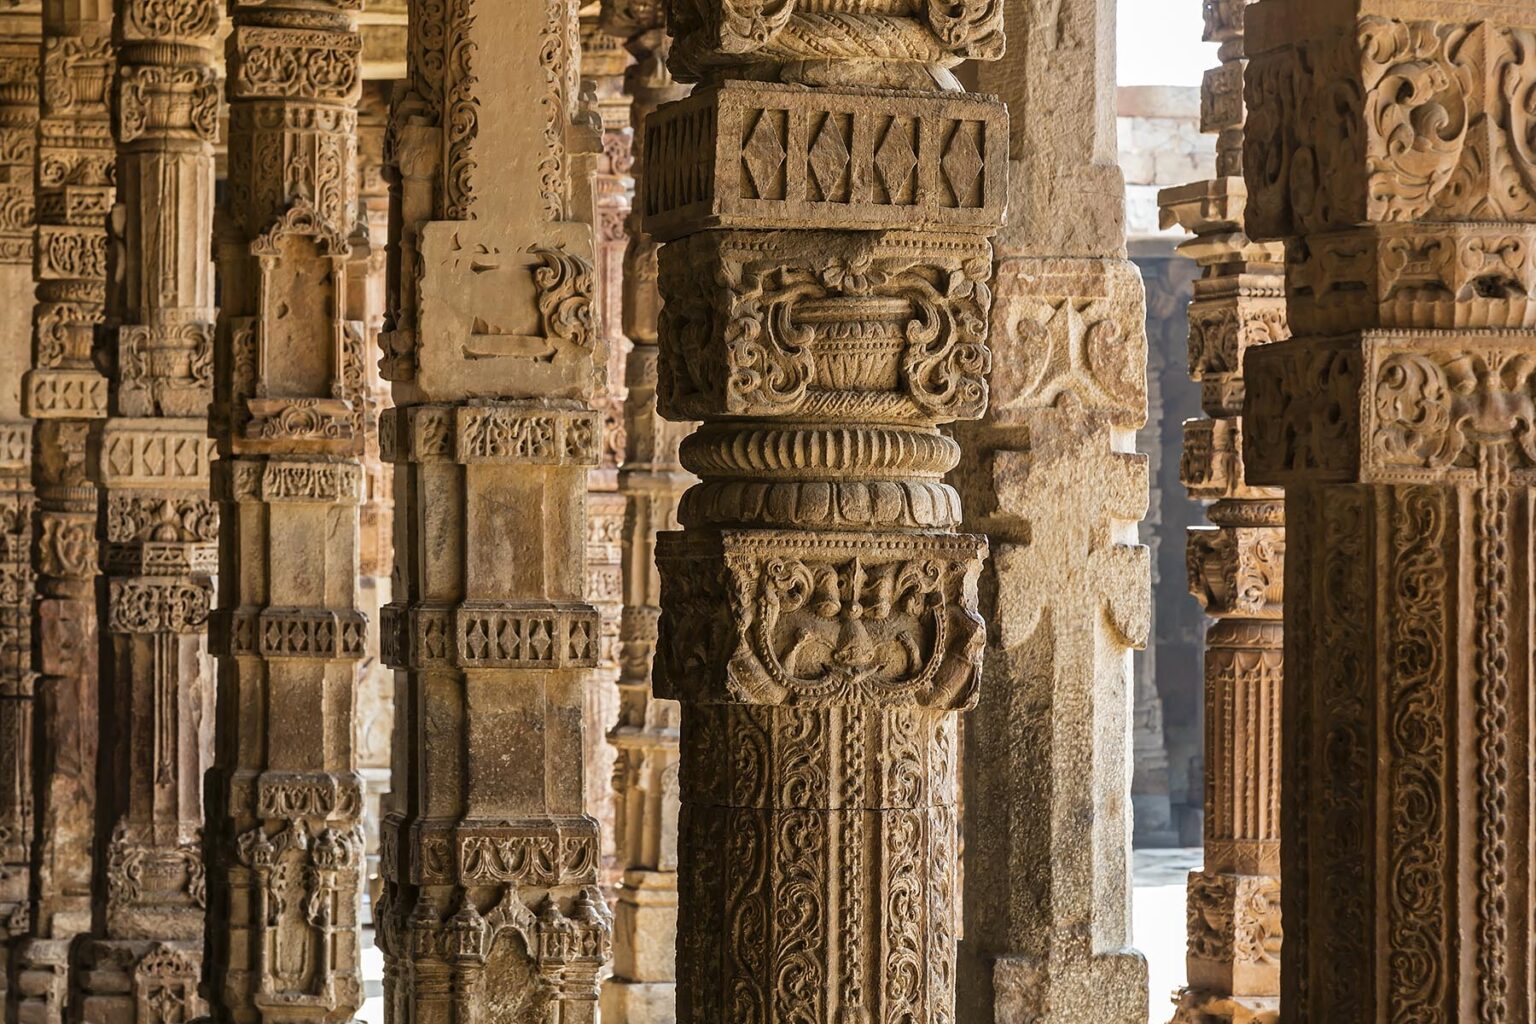 The QUTB COMPLEX, built in the 12th century, is part of a UNESCO WORLD HERITAGE SITE - NEW DELHI, INDIA